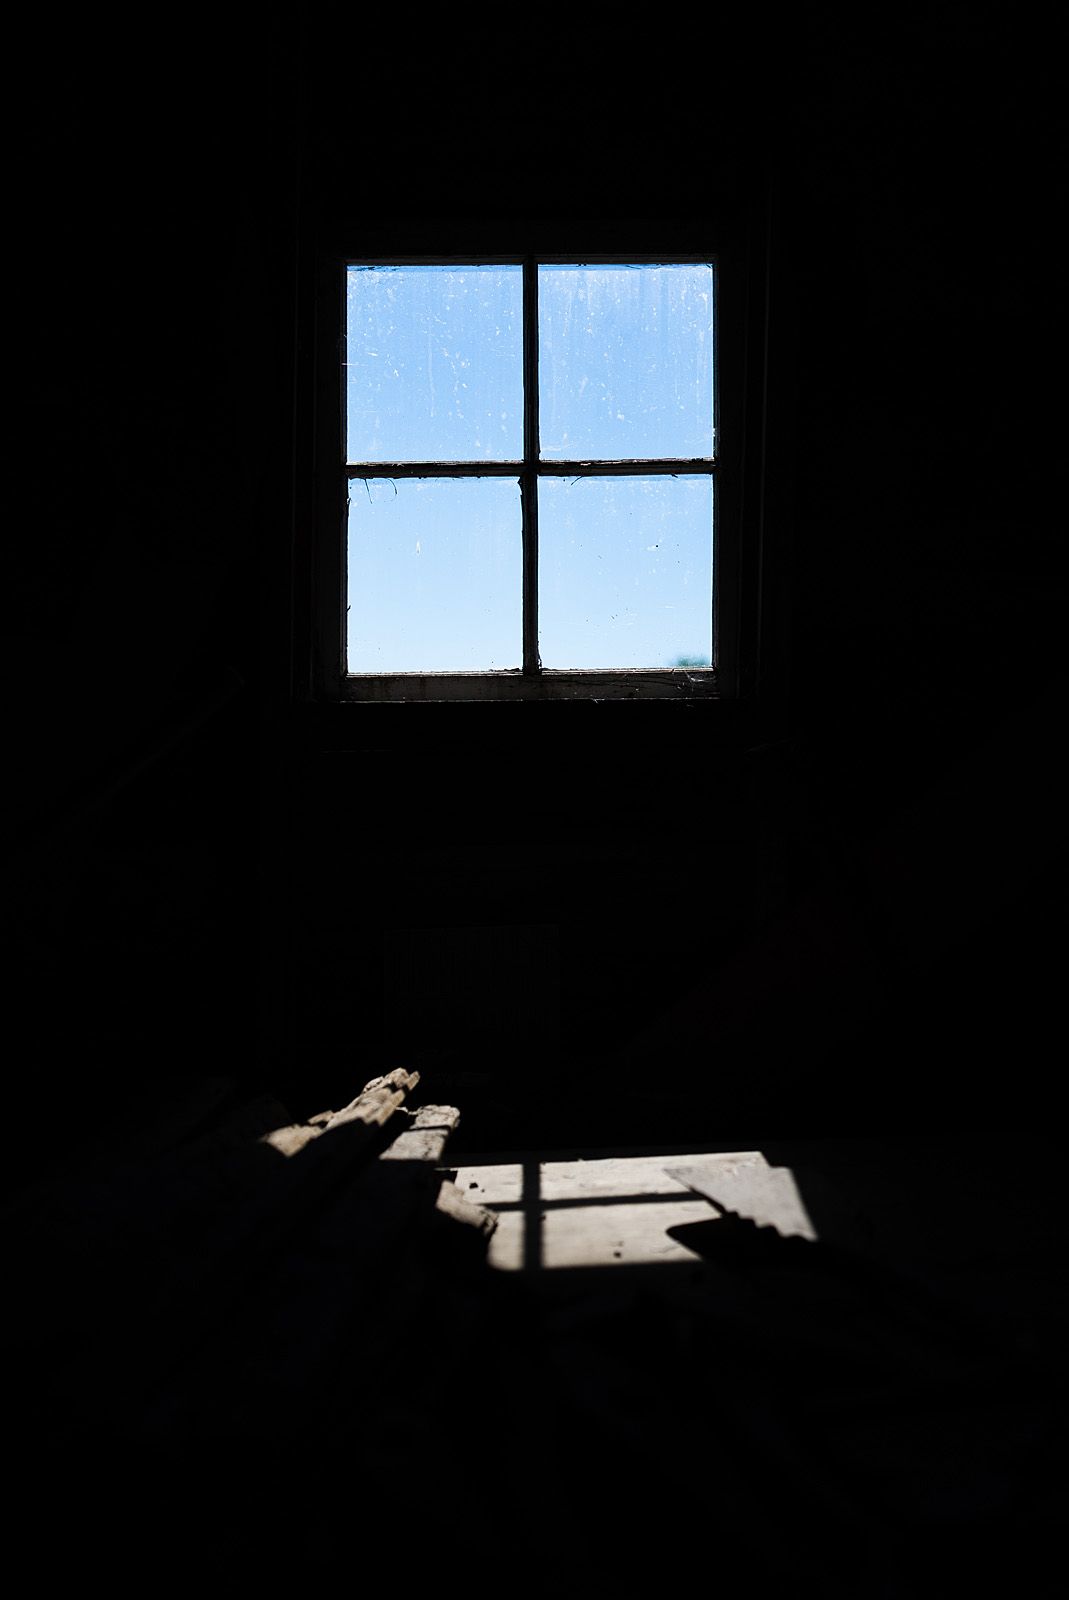 In the darkened blacksmith shop, only a window casts light.